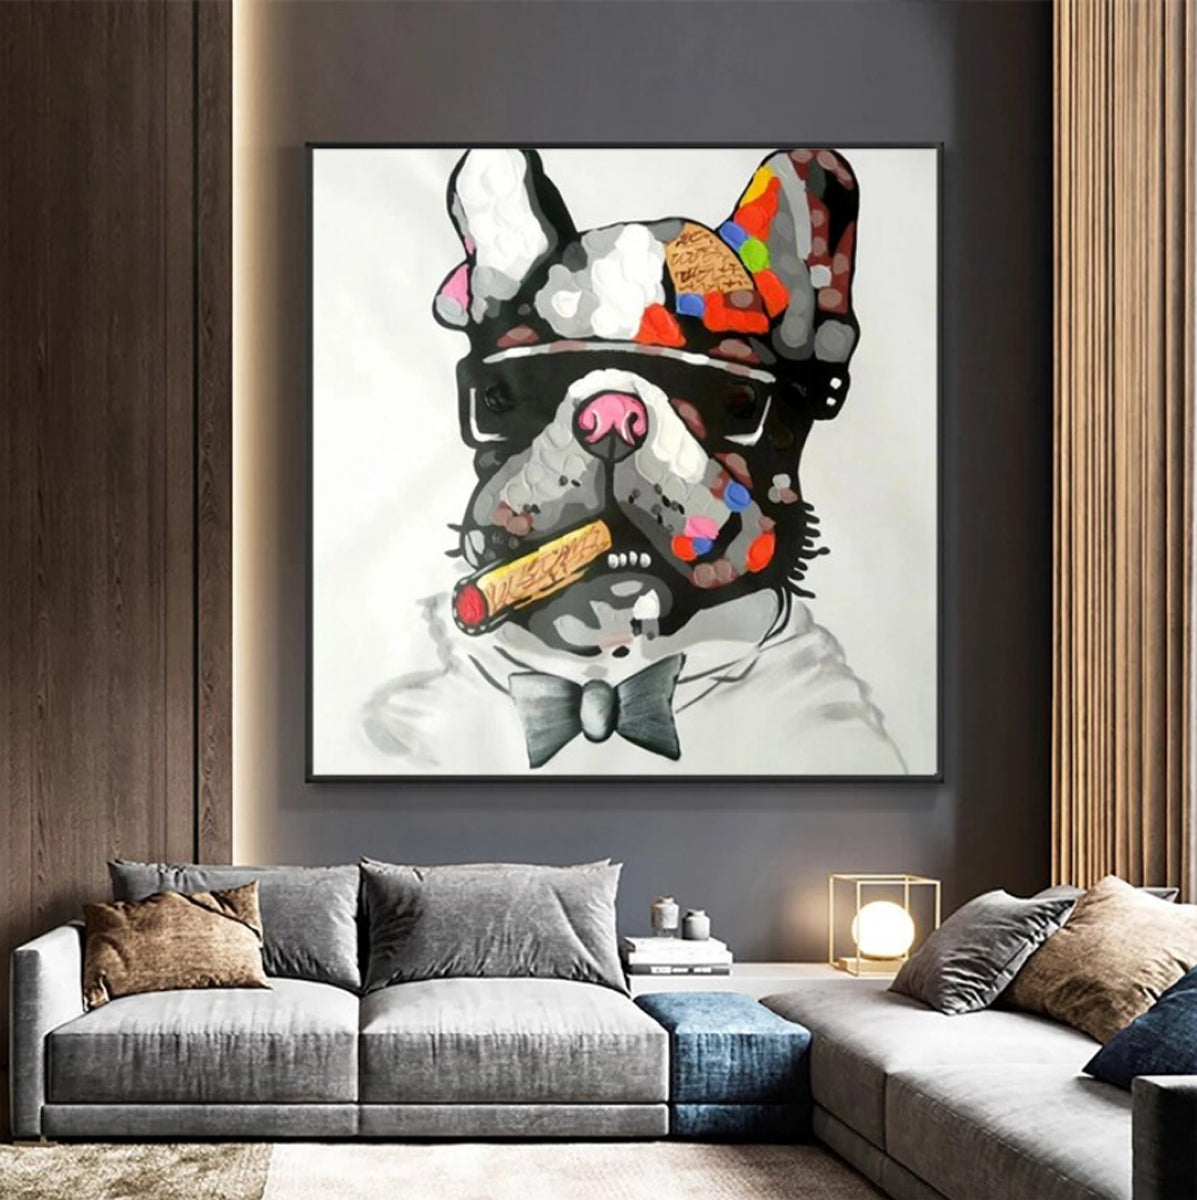 / Animal TPFLiving Abstract, Colorful Canvas / Poster Traumpreisfabrik Funny and – Motifs